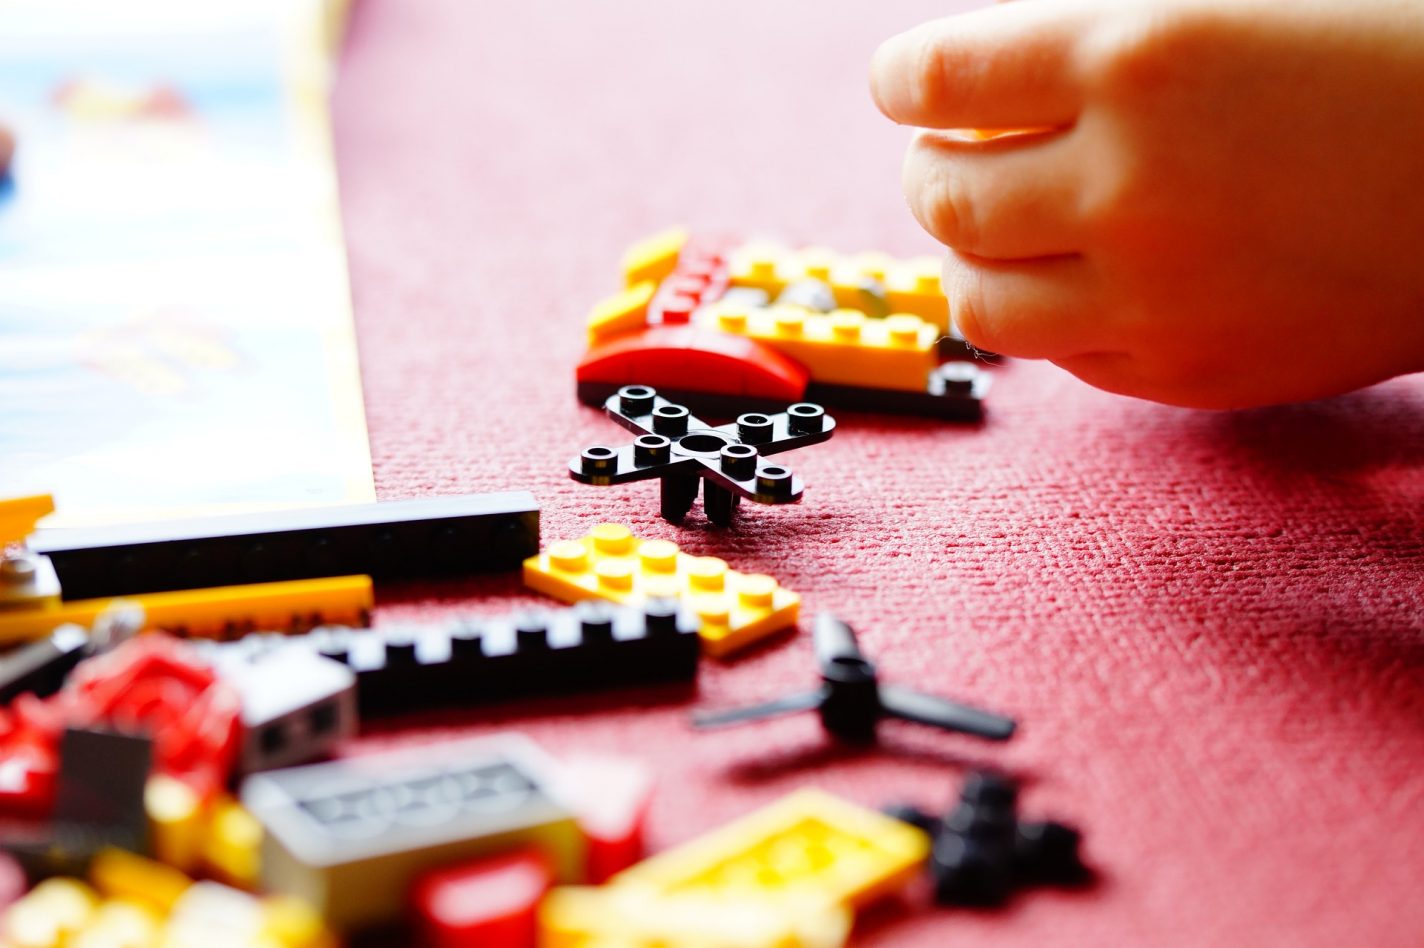 The image shows a child playing with lego blocks